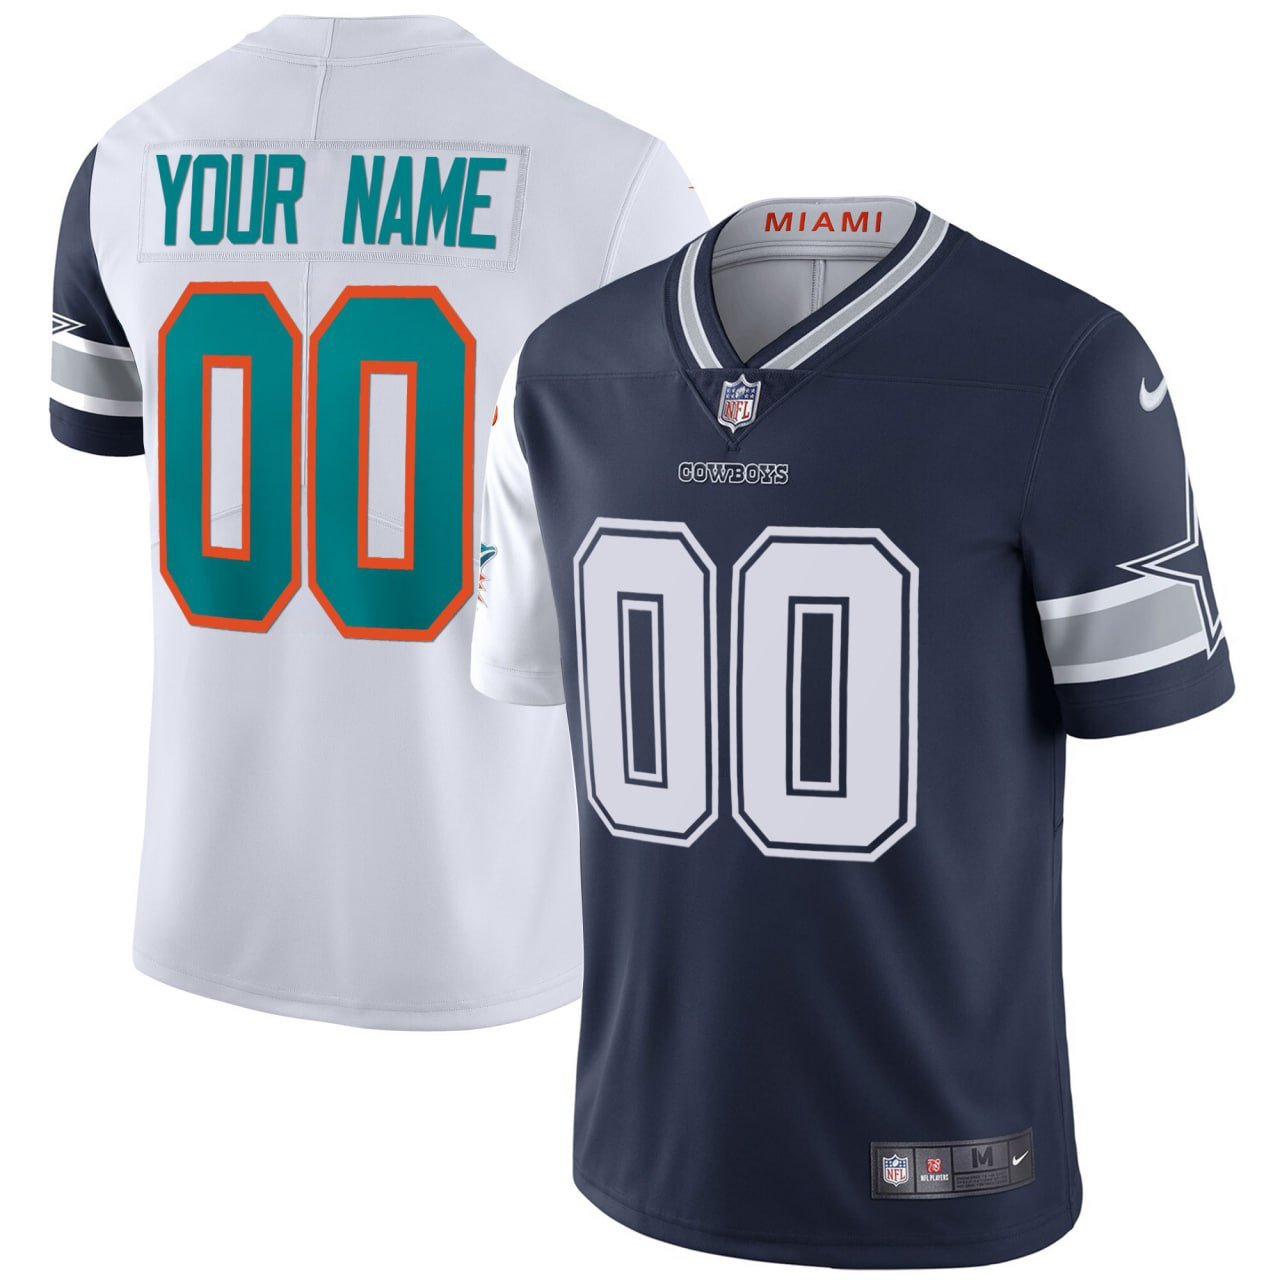 Dallas Cowboys Mix Miami Dolphins Custom Jersey - All Stitched - Nebgift